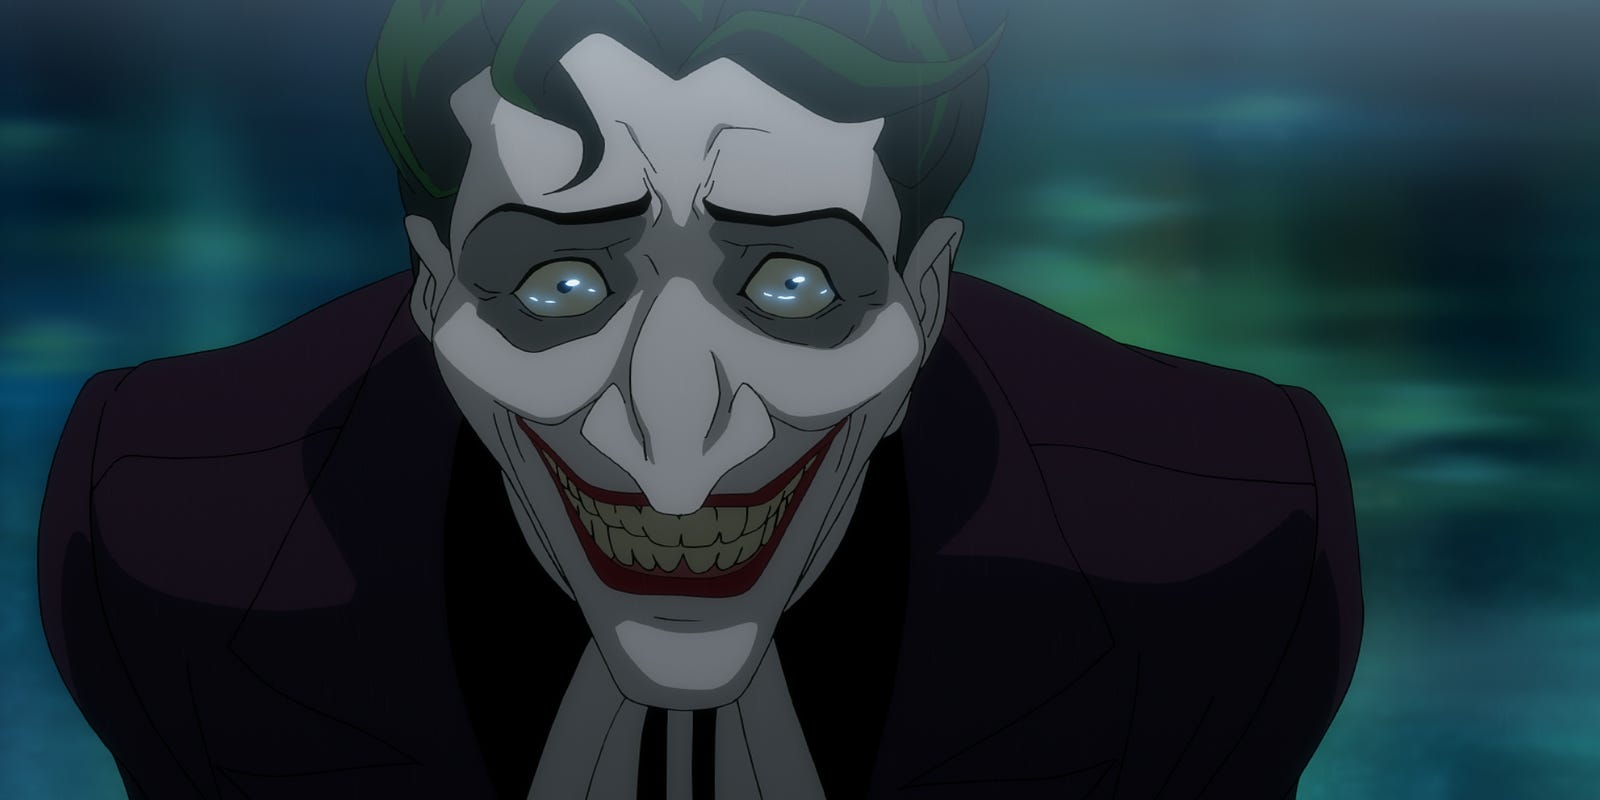 Killing Joke' rehashes controversy with new movie